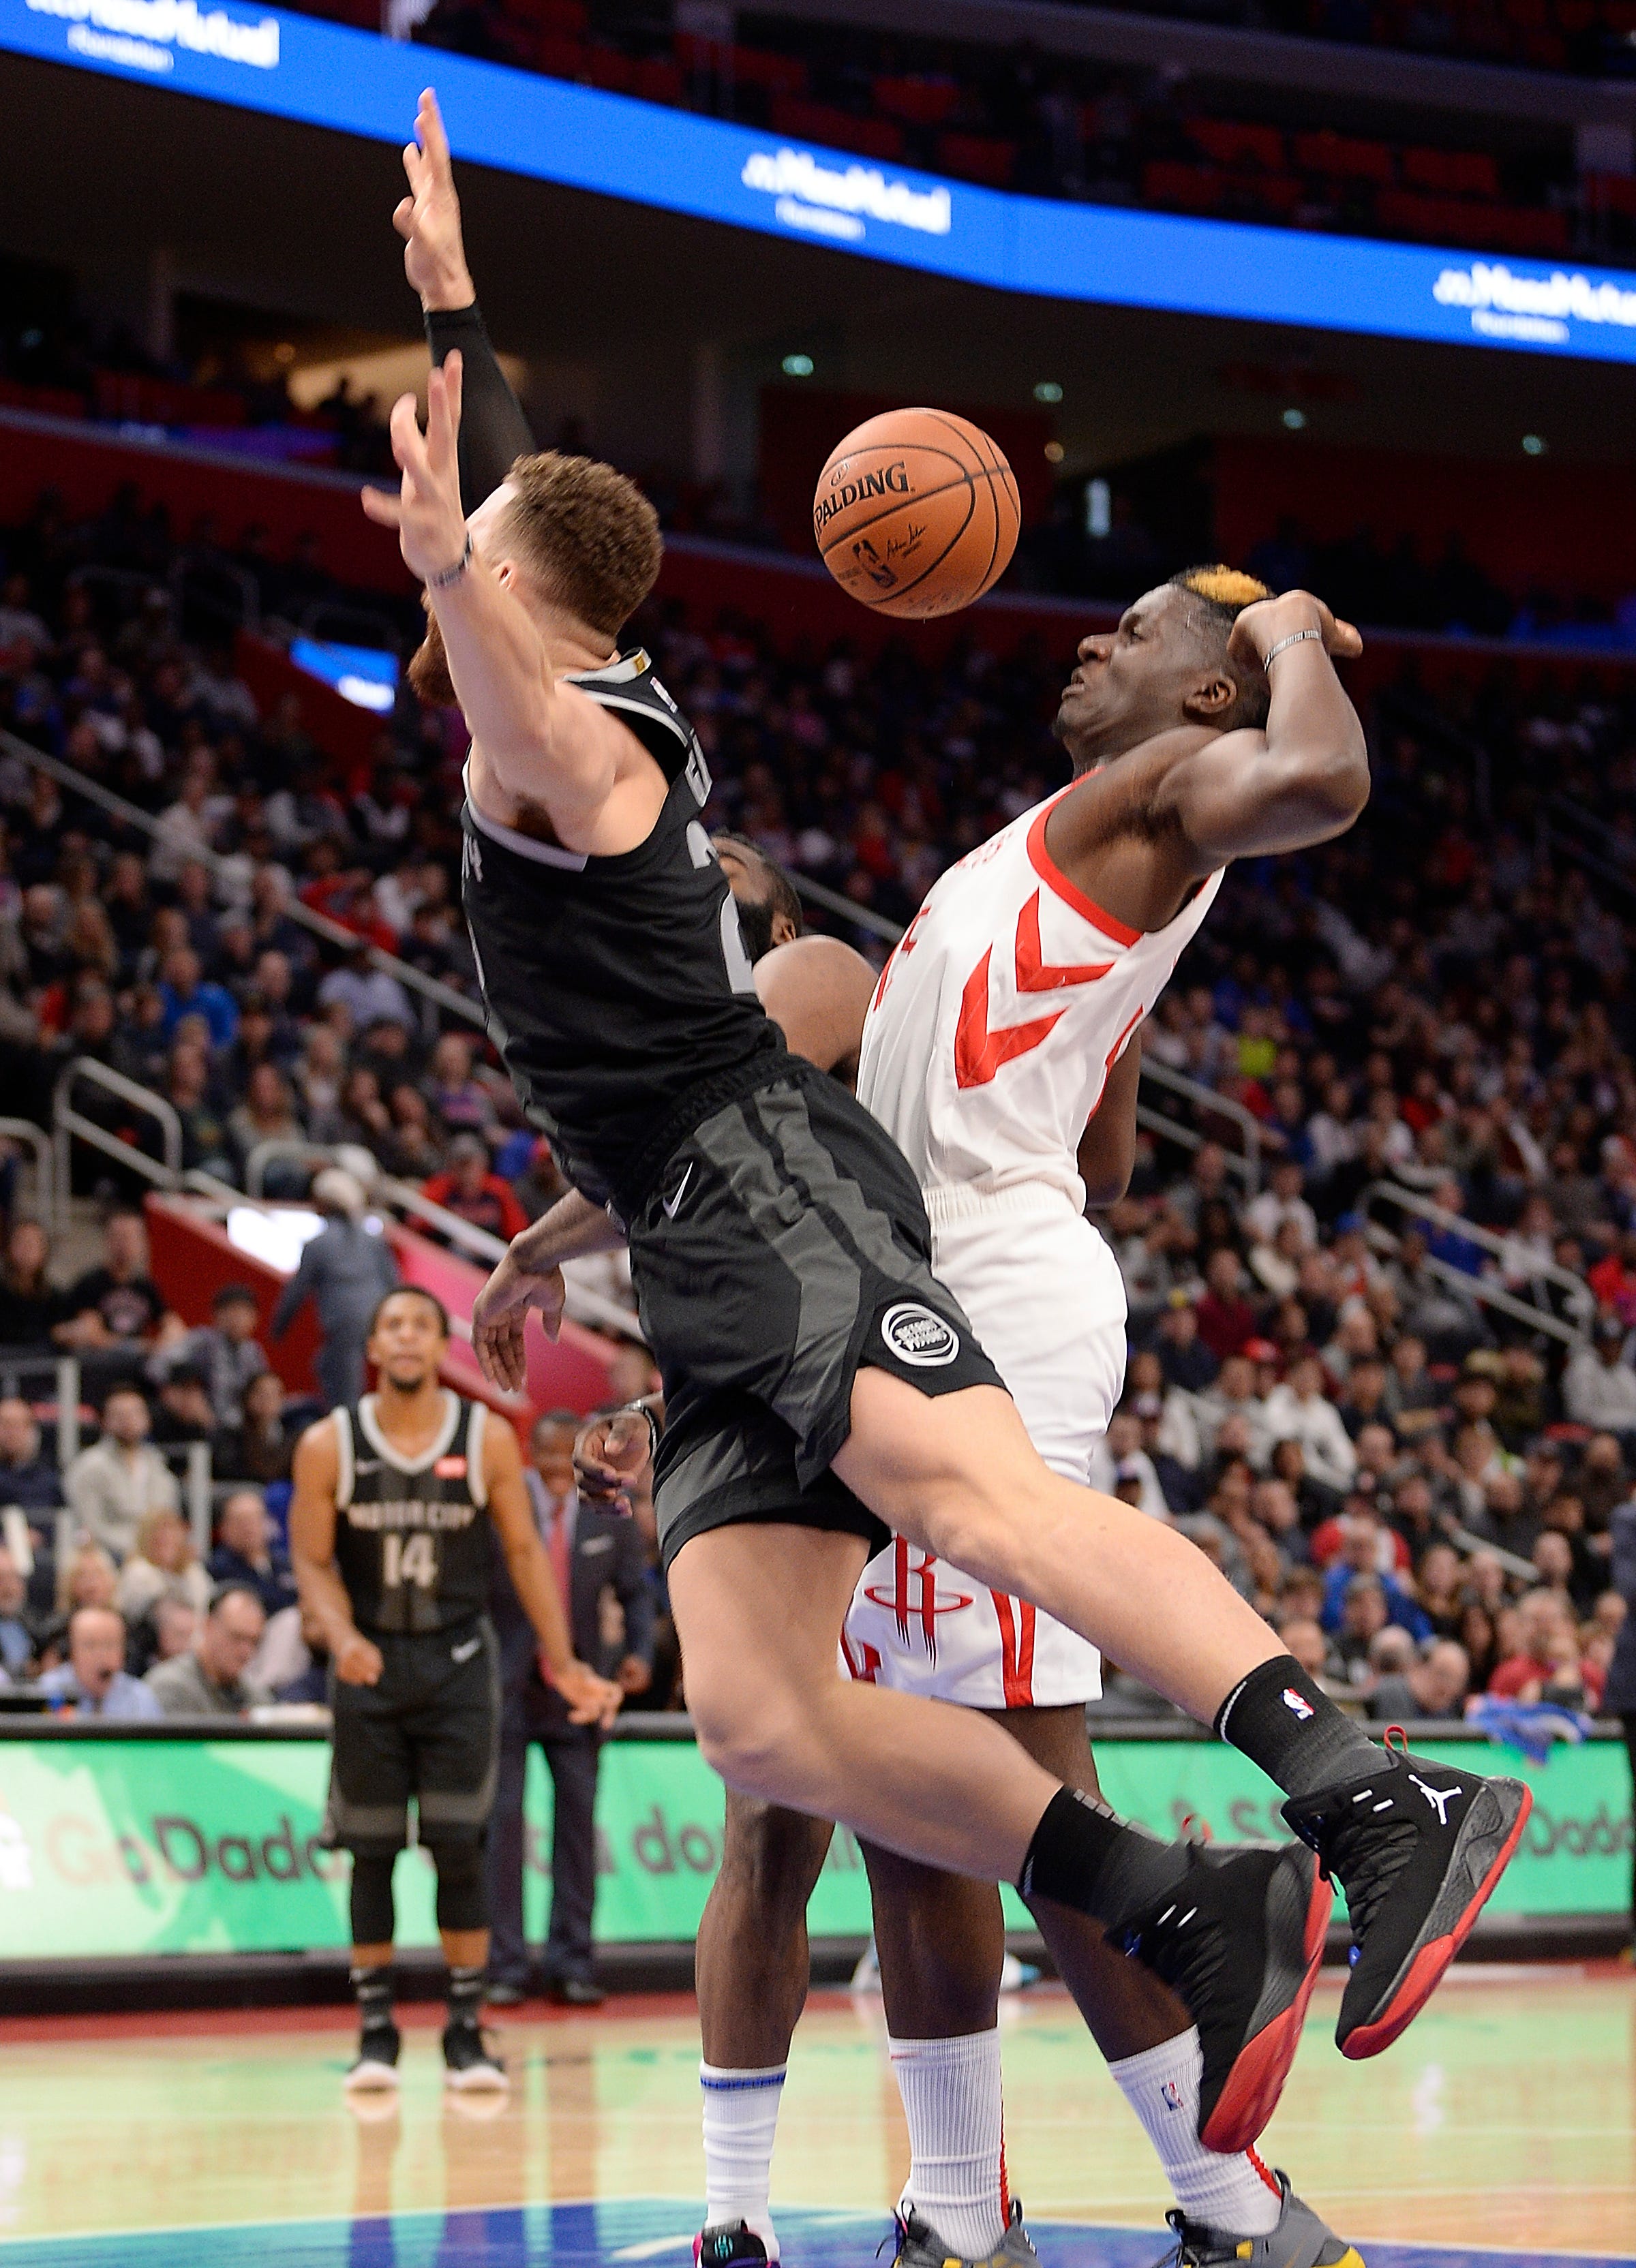 Pistons' Blake Griffin is fouled by Rockets' Clint Capela in the second quarter.